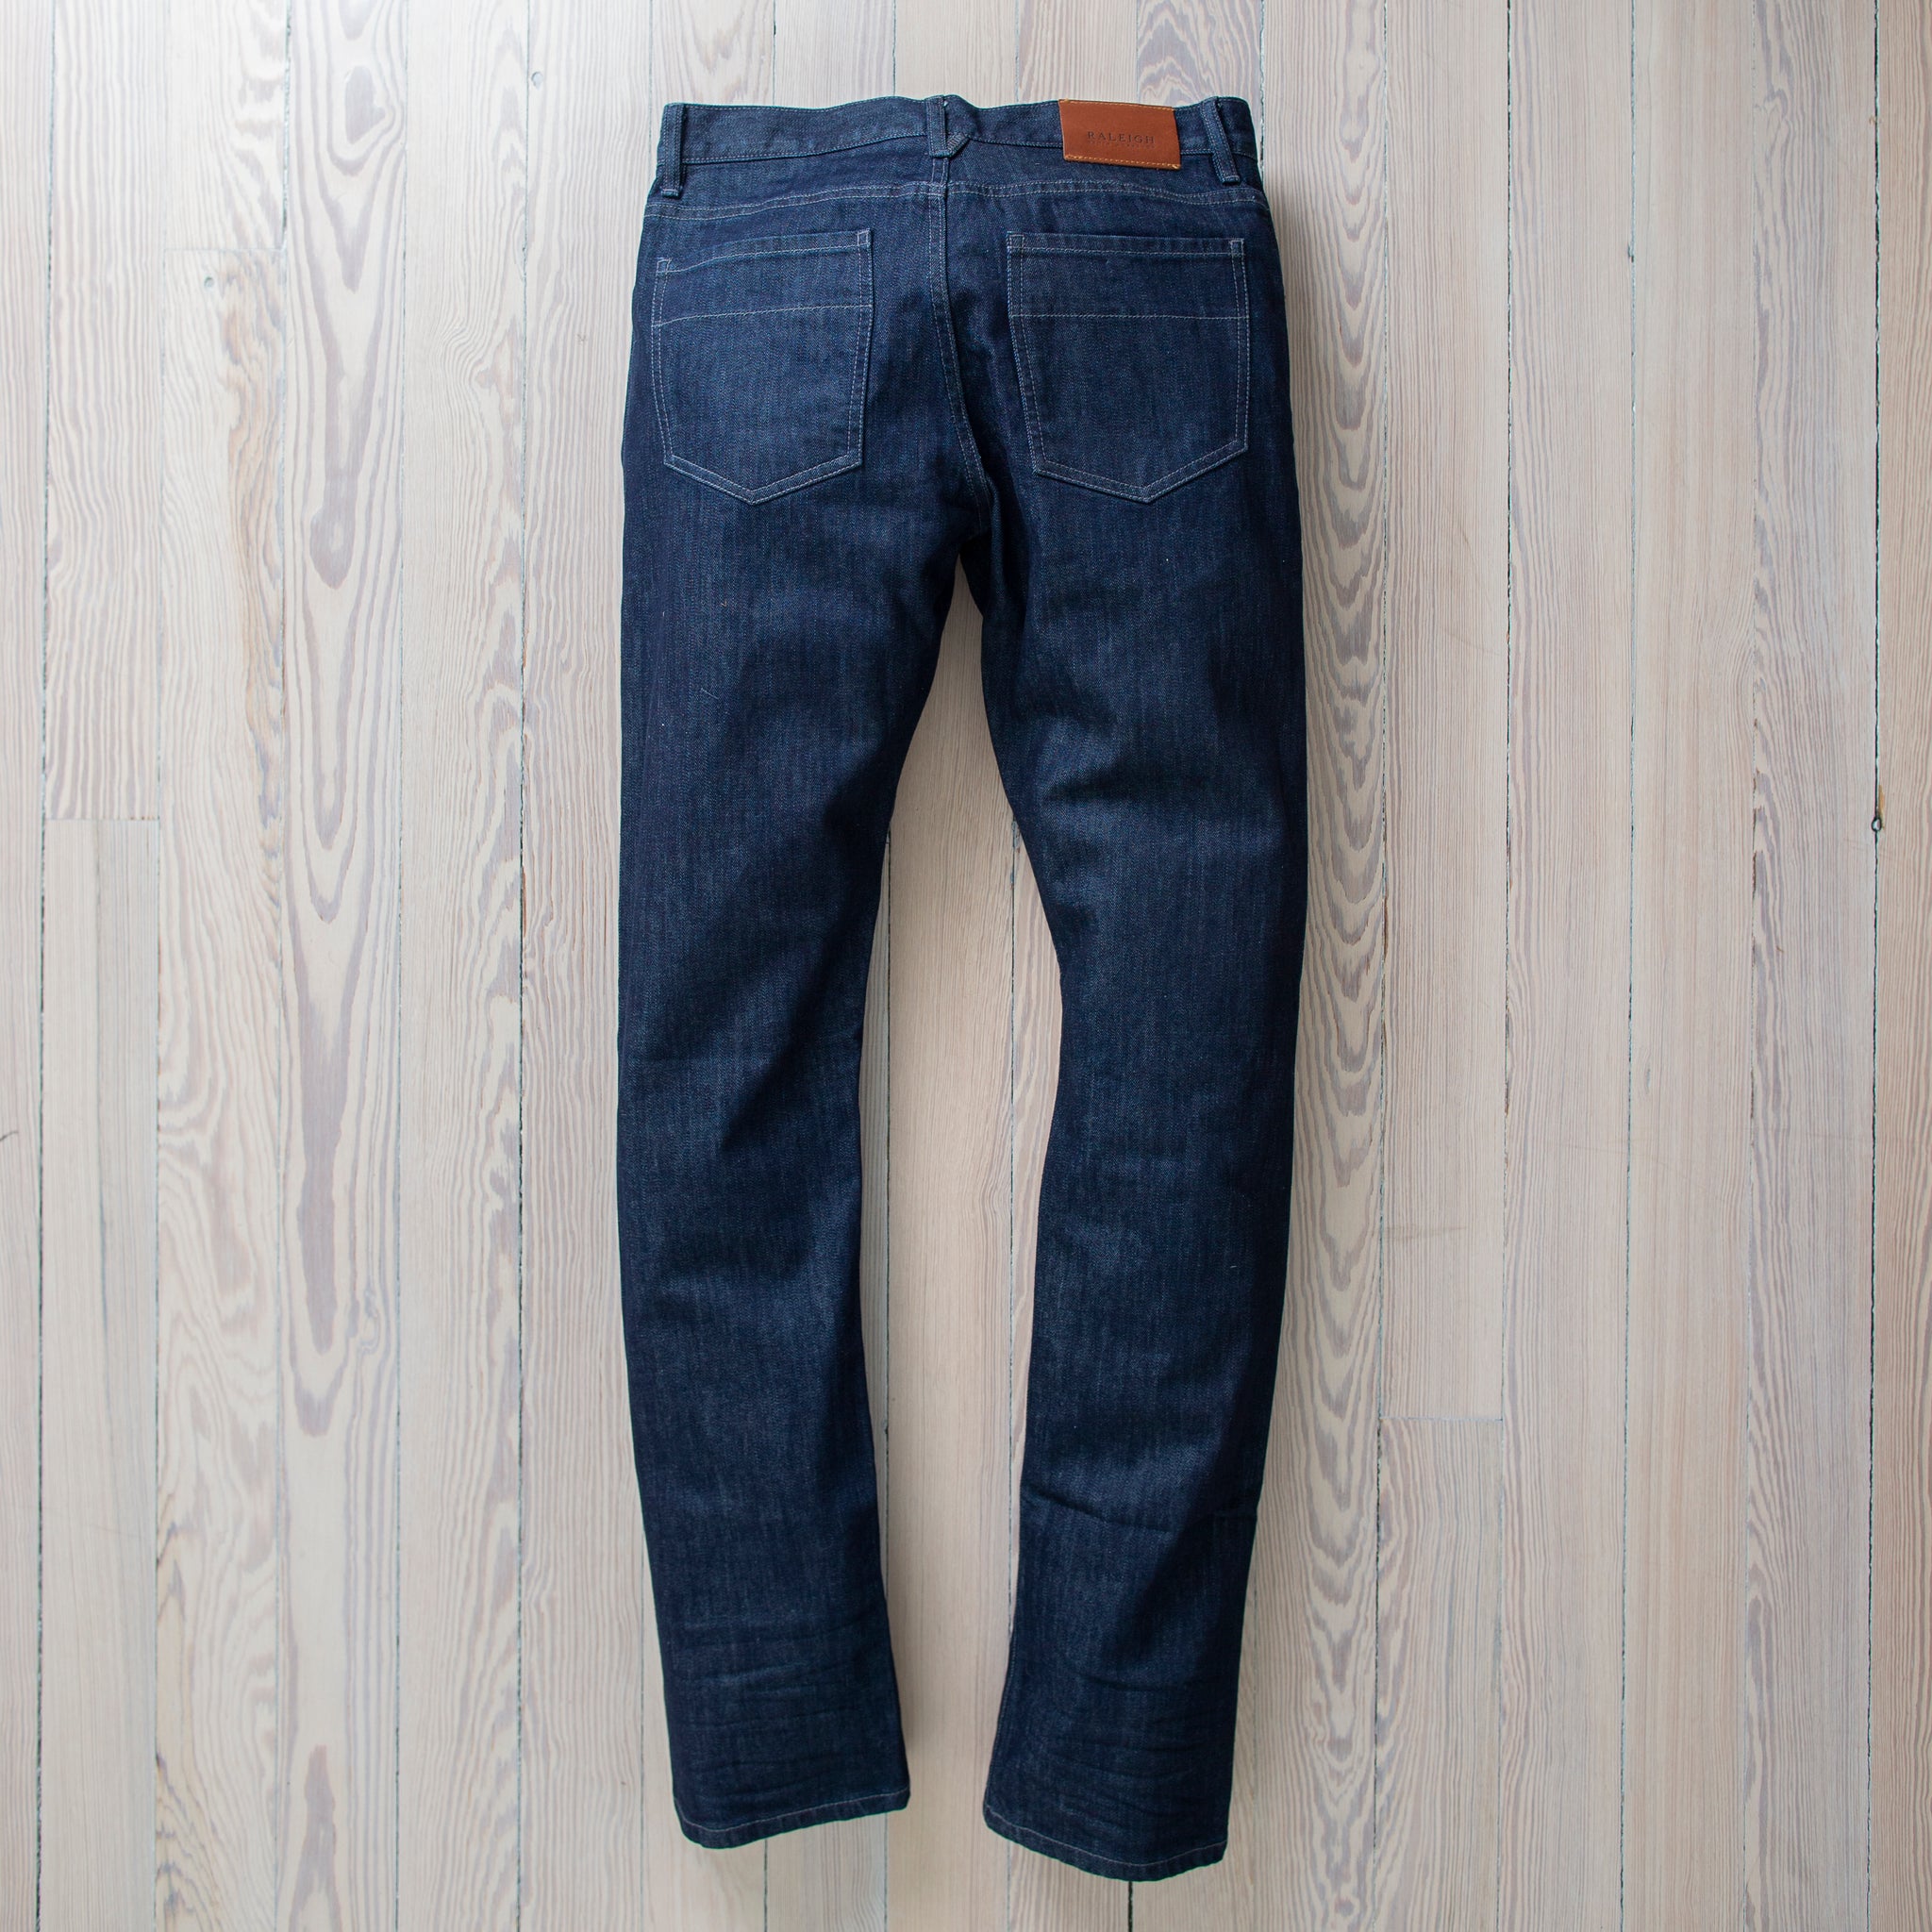 angle: resin rinse  Raleigh Denim Workshop Jones thin fit in a dark wash, front view